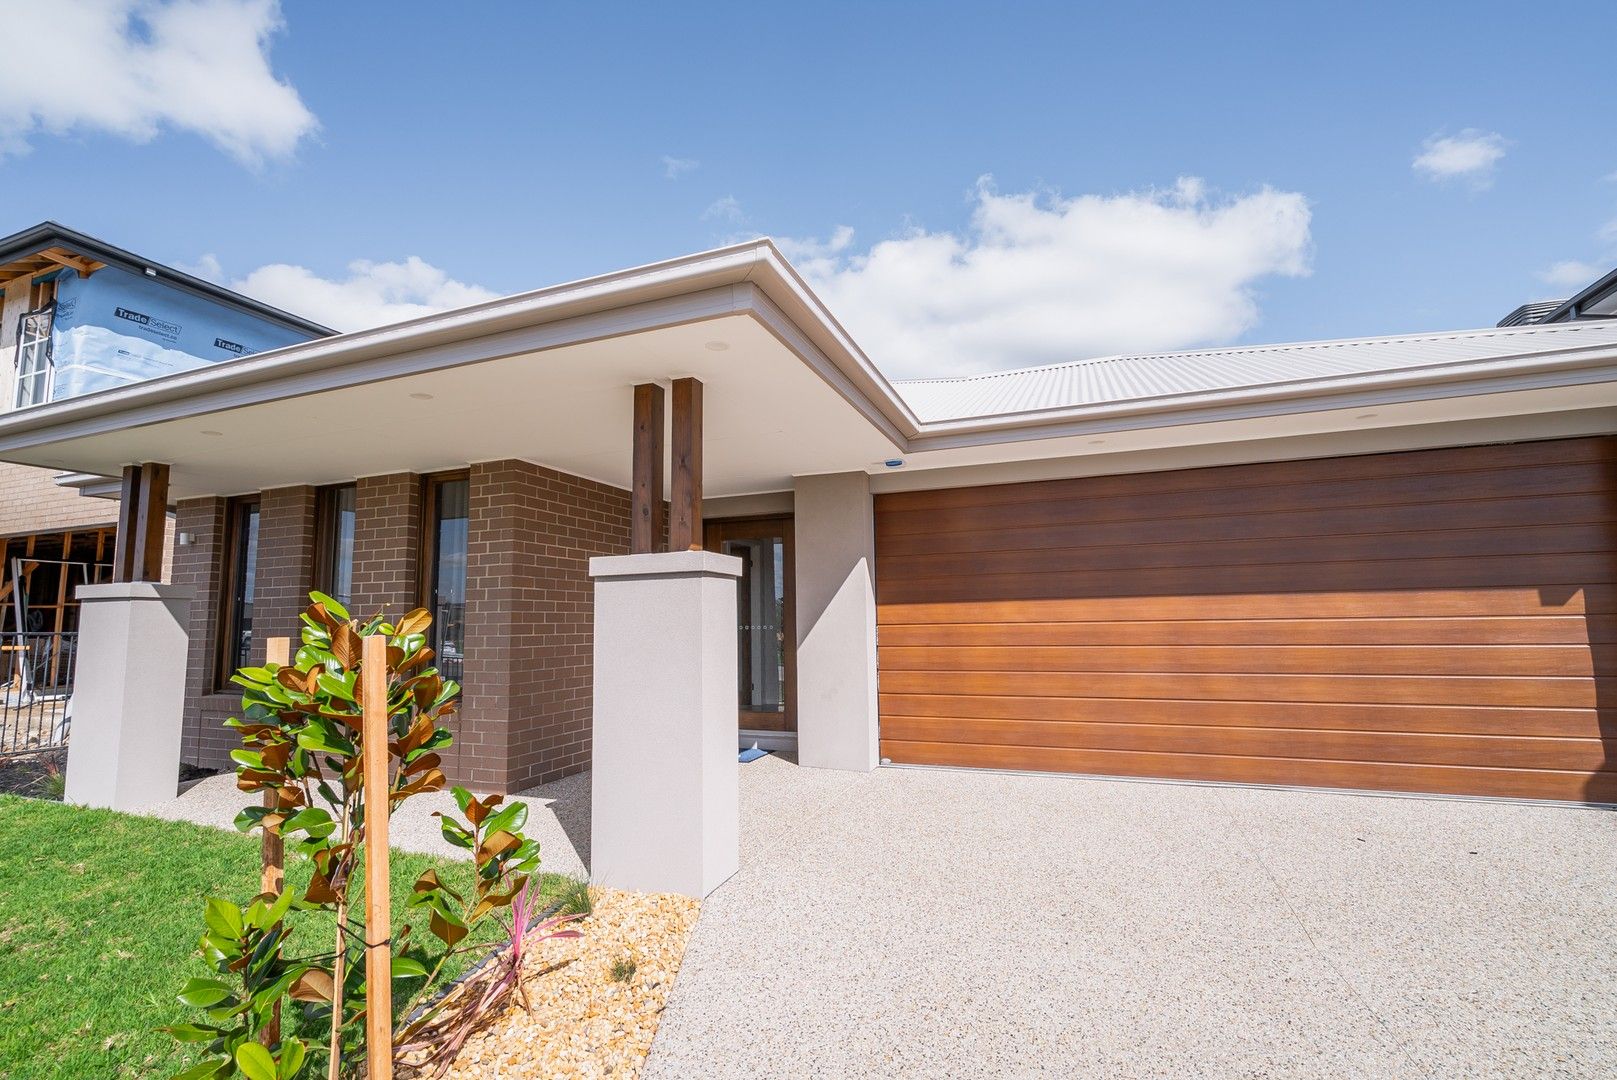 4 bedrooms New House & Land in Lot 2138 Yarlington Road TARNEIT VIC, 3029